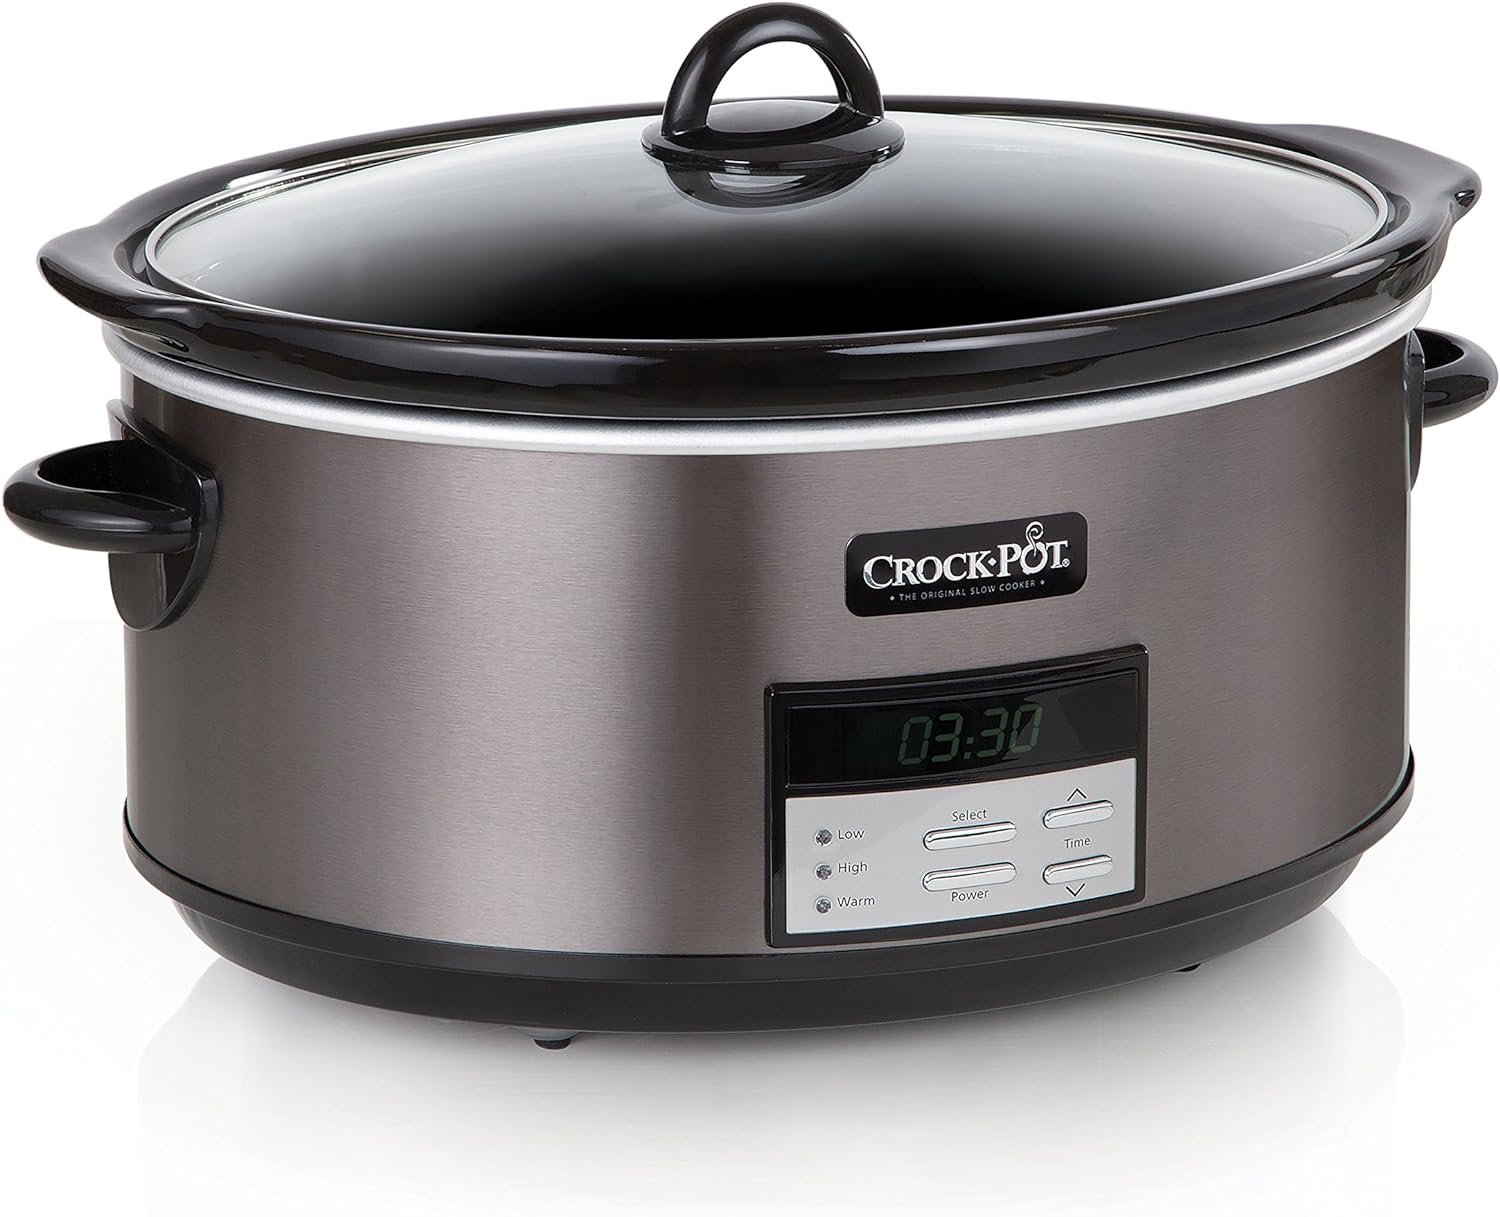 Crock-Pot Large 8-Quart Programmable Slow Cooker with Auto Warm Setting, Black Stainless Steel, Includes Cookbook (Pack of 1)